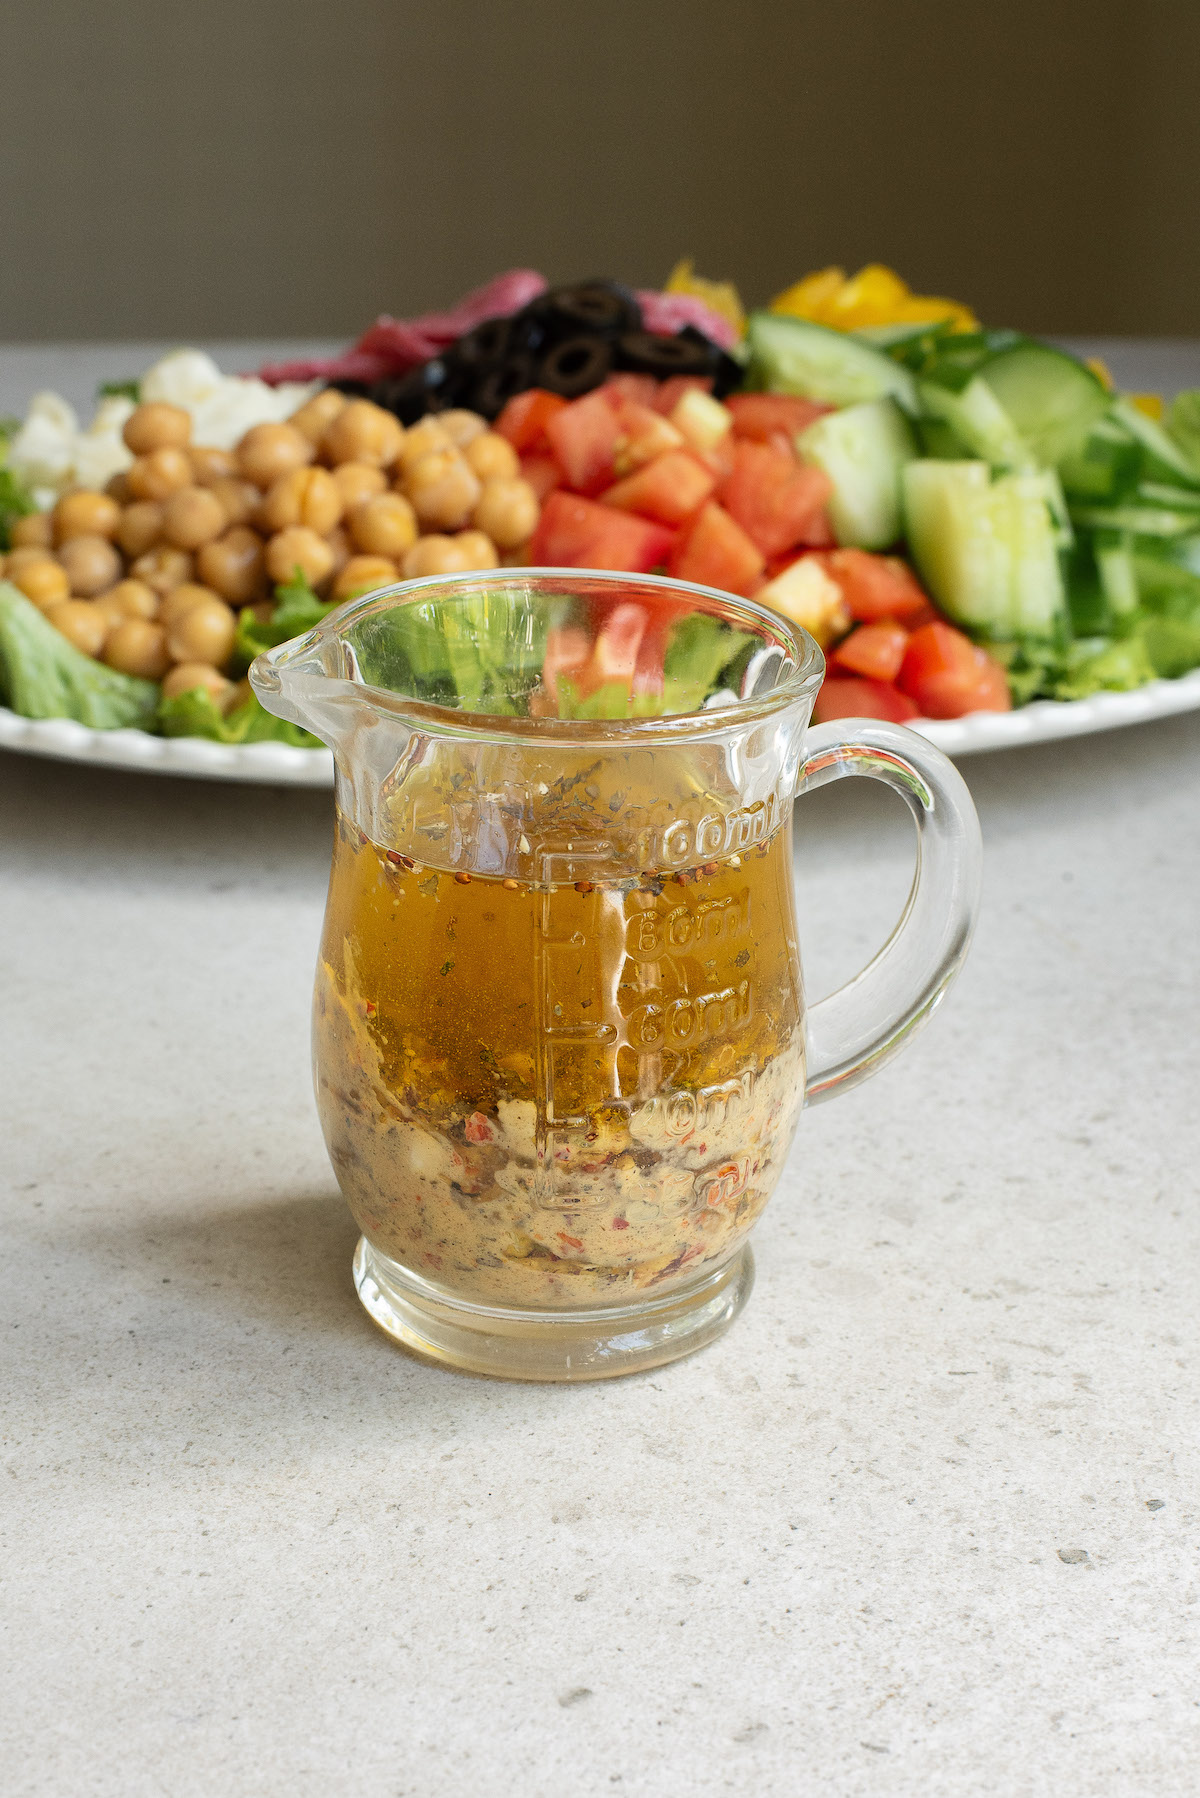 a glass pitcher of salad dressing set in front of the chopped salad